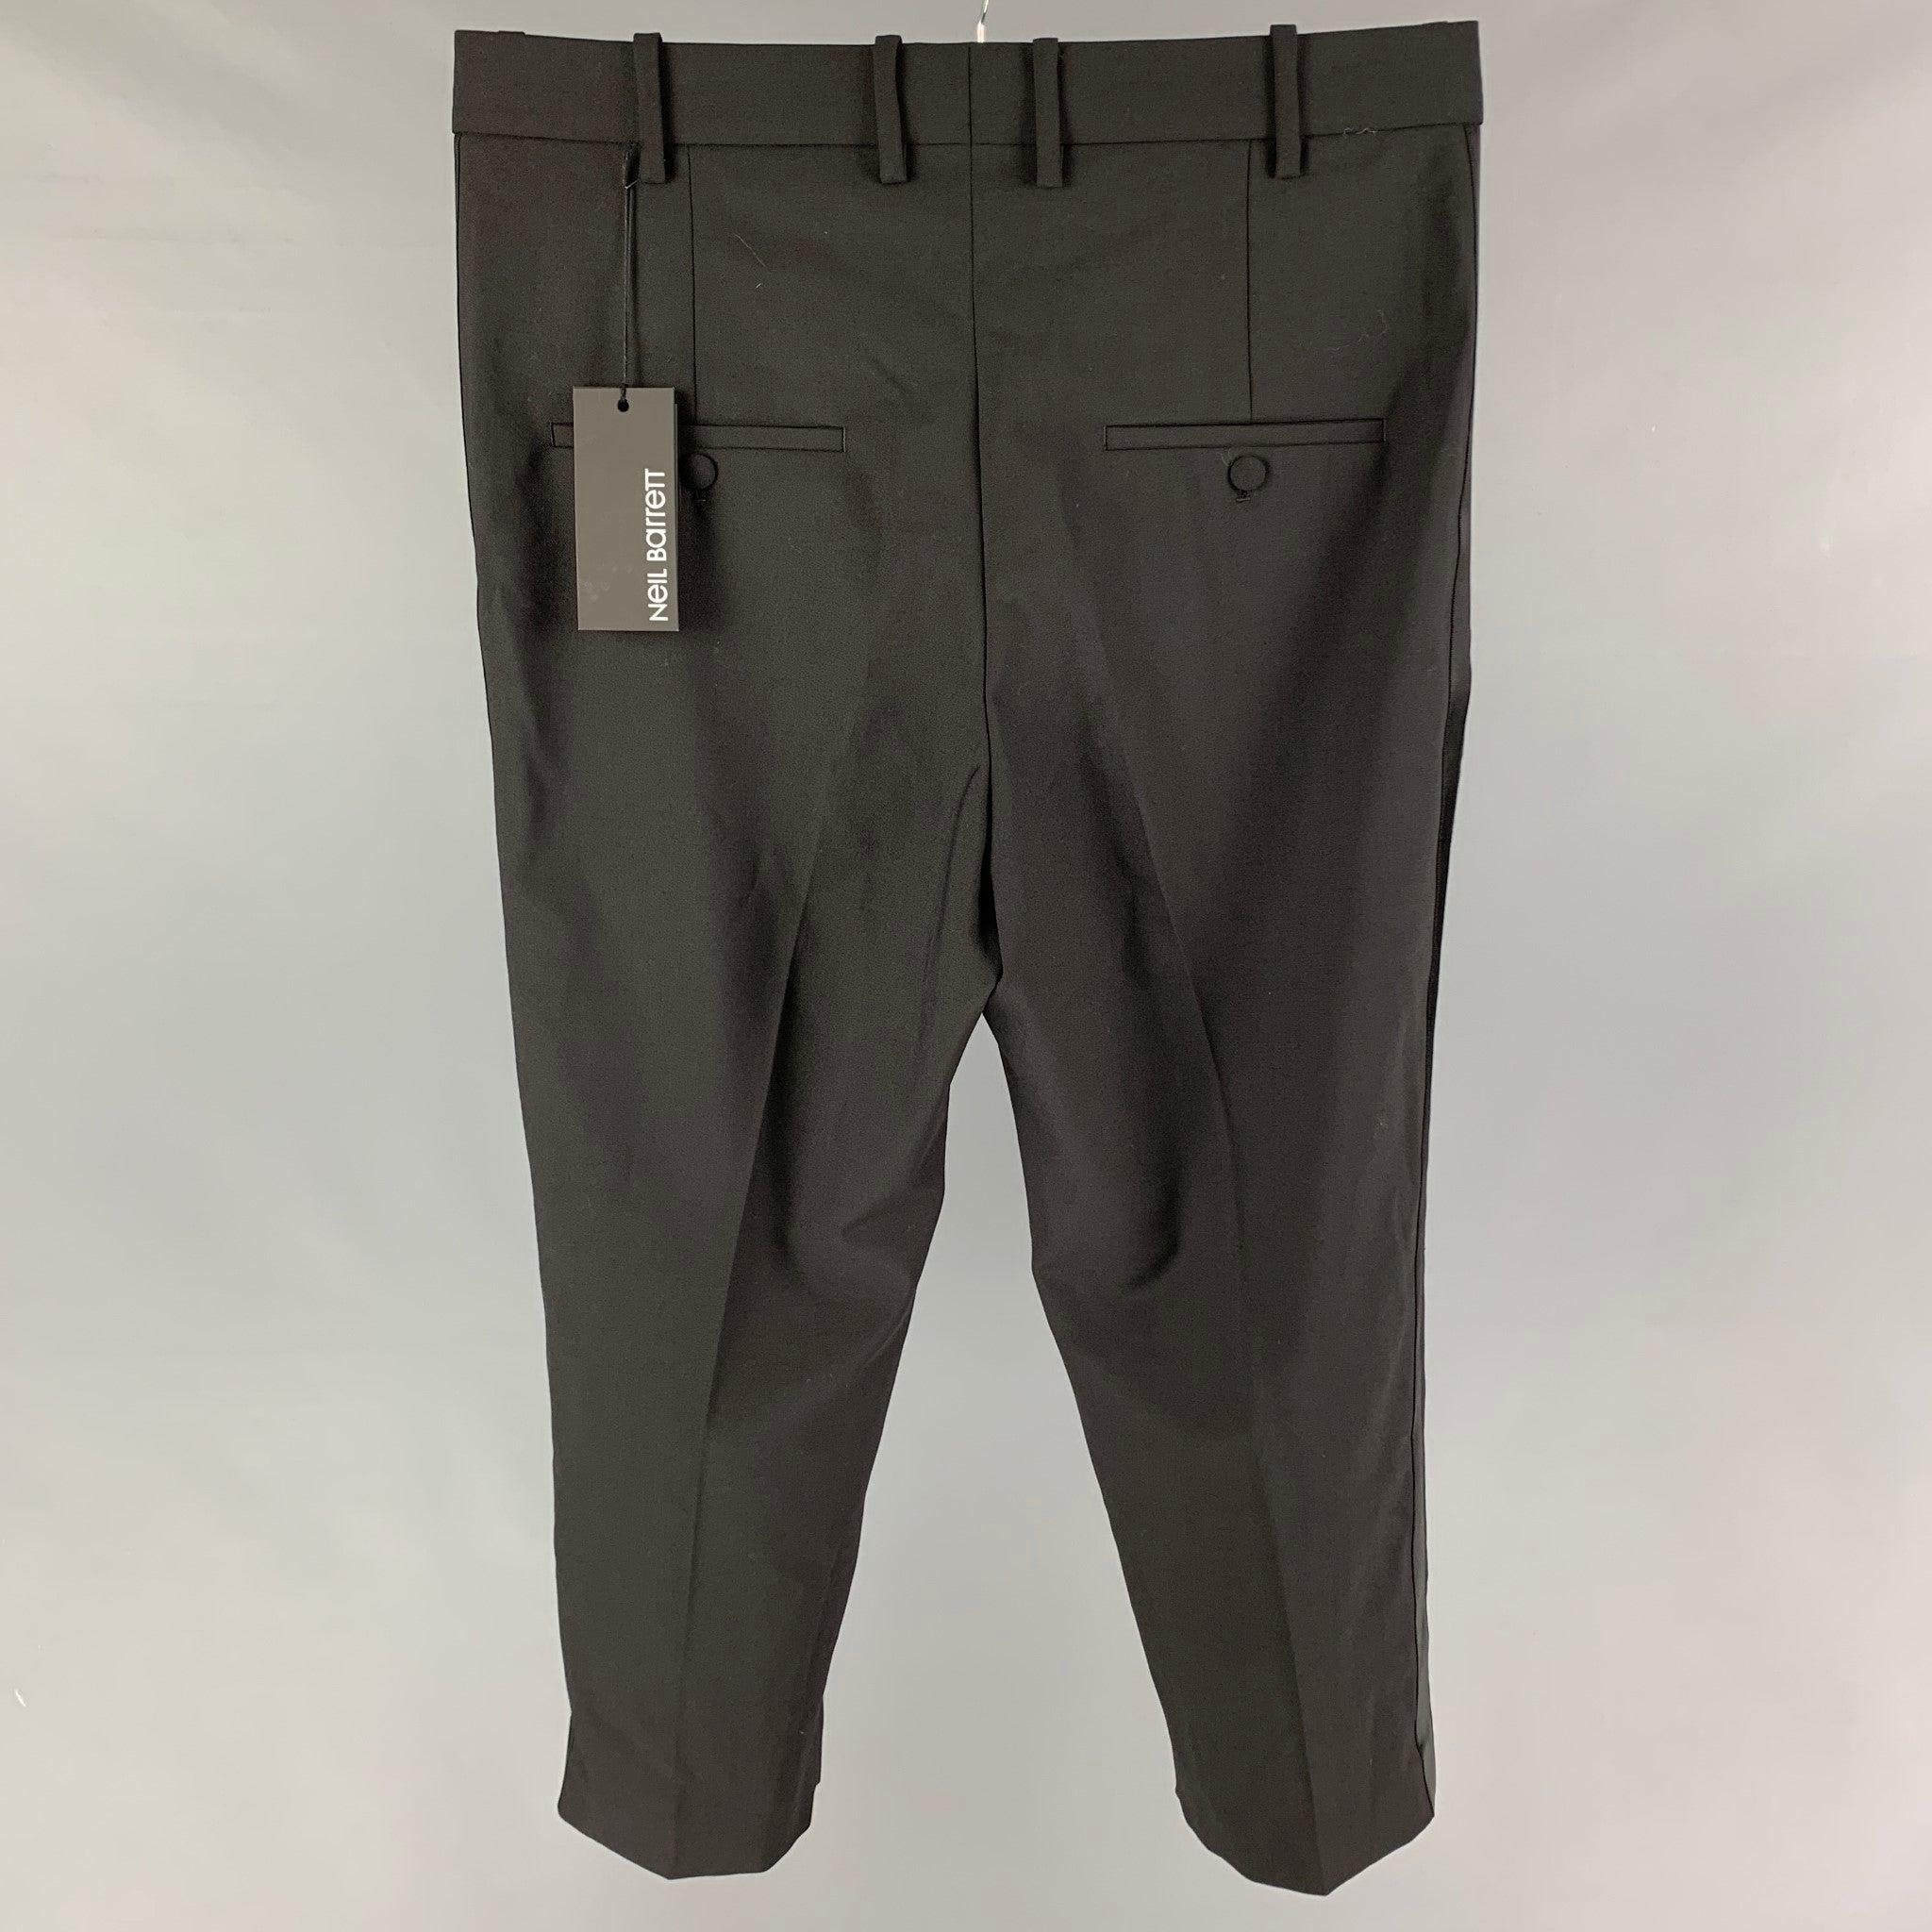 NEIL BARRETT dress pants comes in a black polyester blend featuring a cropped leg, tuxedo stripe, front tab, and a zip fly closure. Made in Italy.
New With Tags.  

Marked:   48 

Measurements: 
  Waist: 34 inches  Rise: 15 inches  Inseam: 24 inches